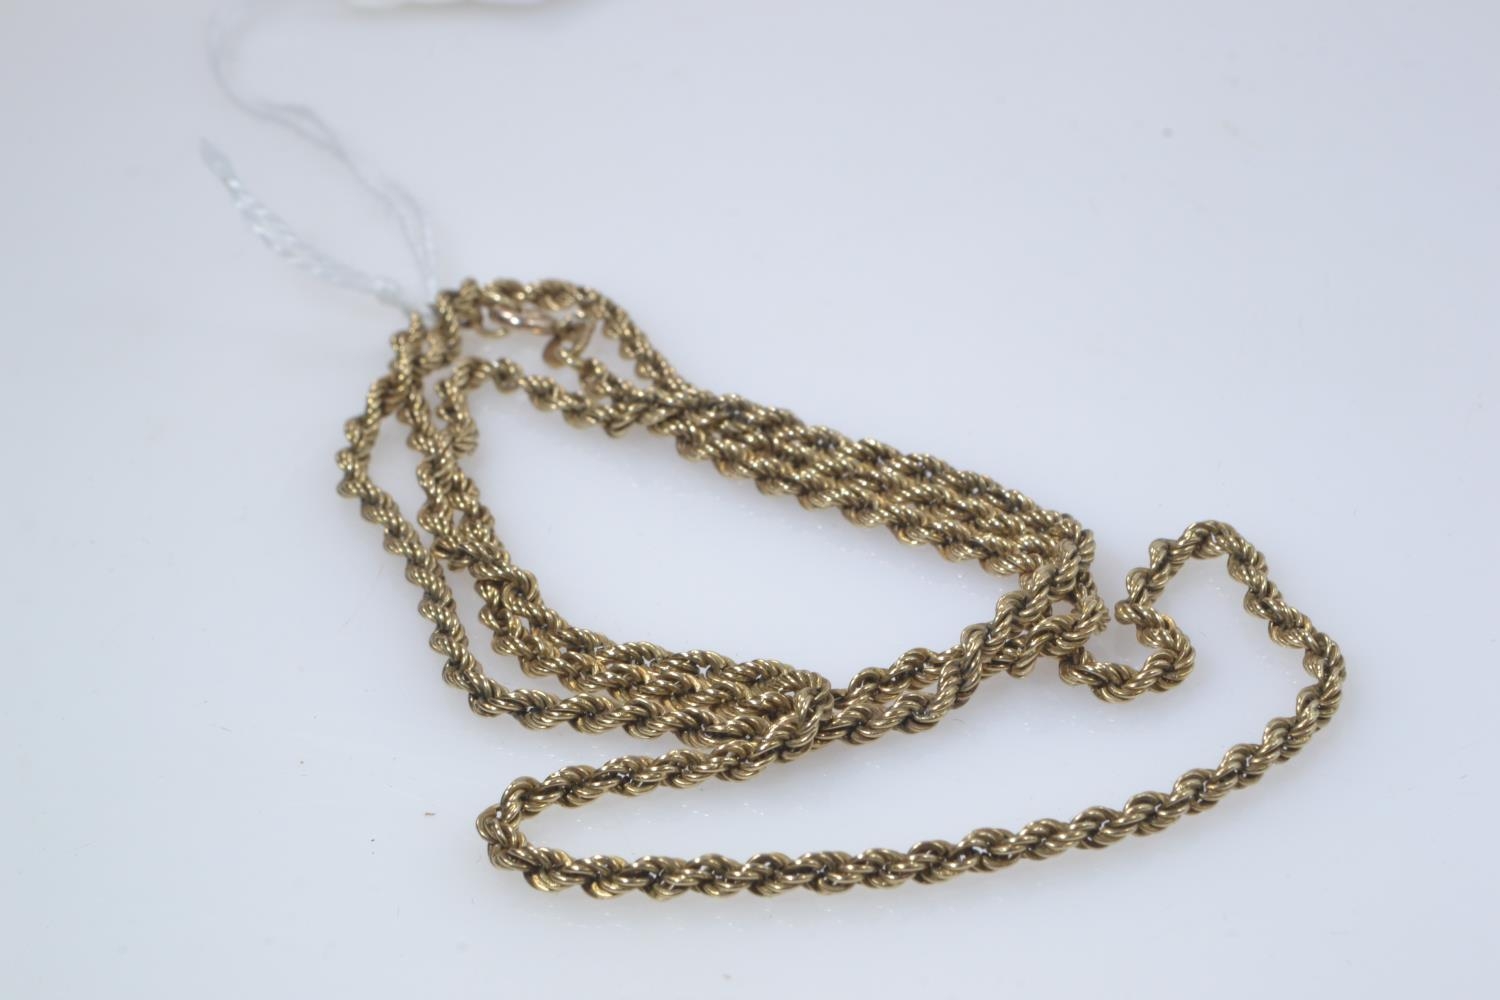 9ct gold rope twist chain, circumference 640mm, gross weight 14 grams  - Image 2 of 3